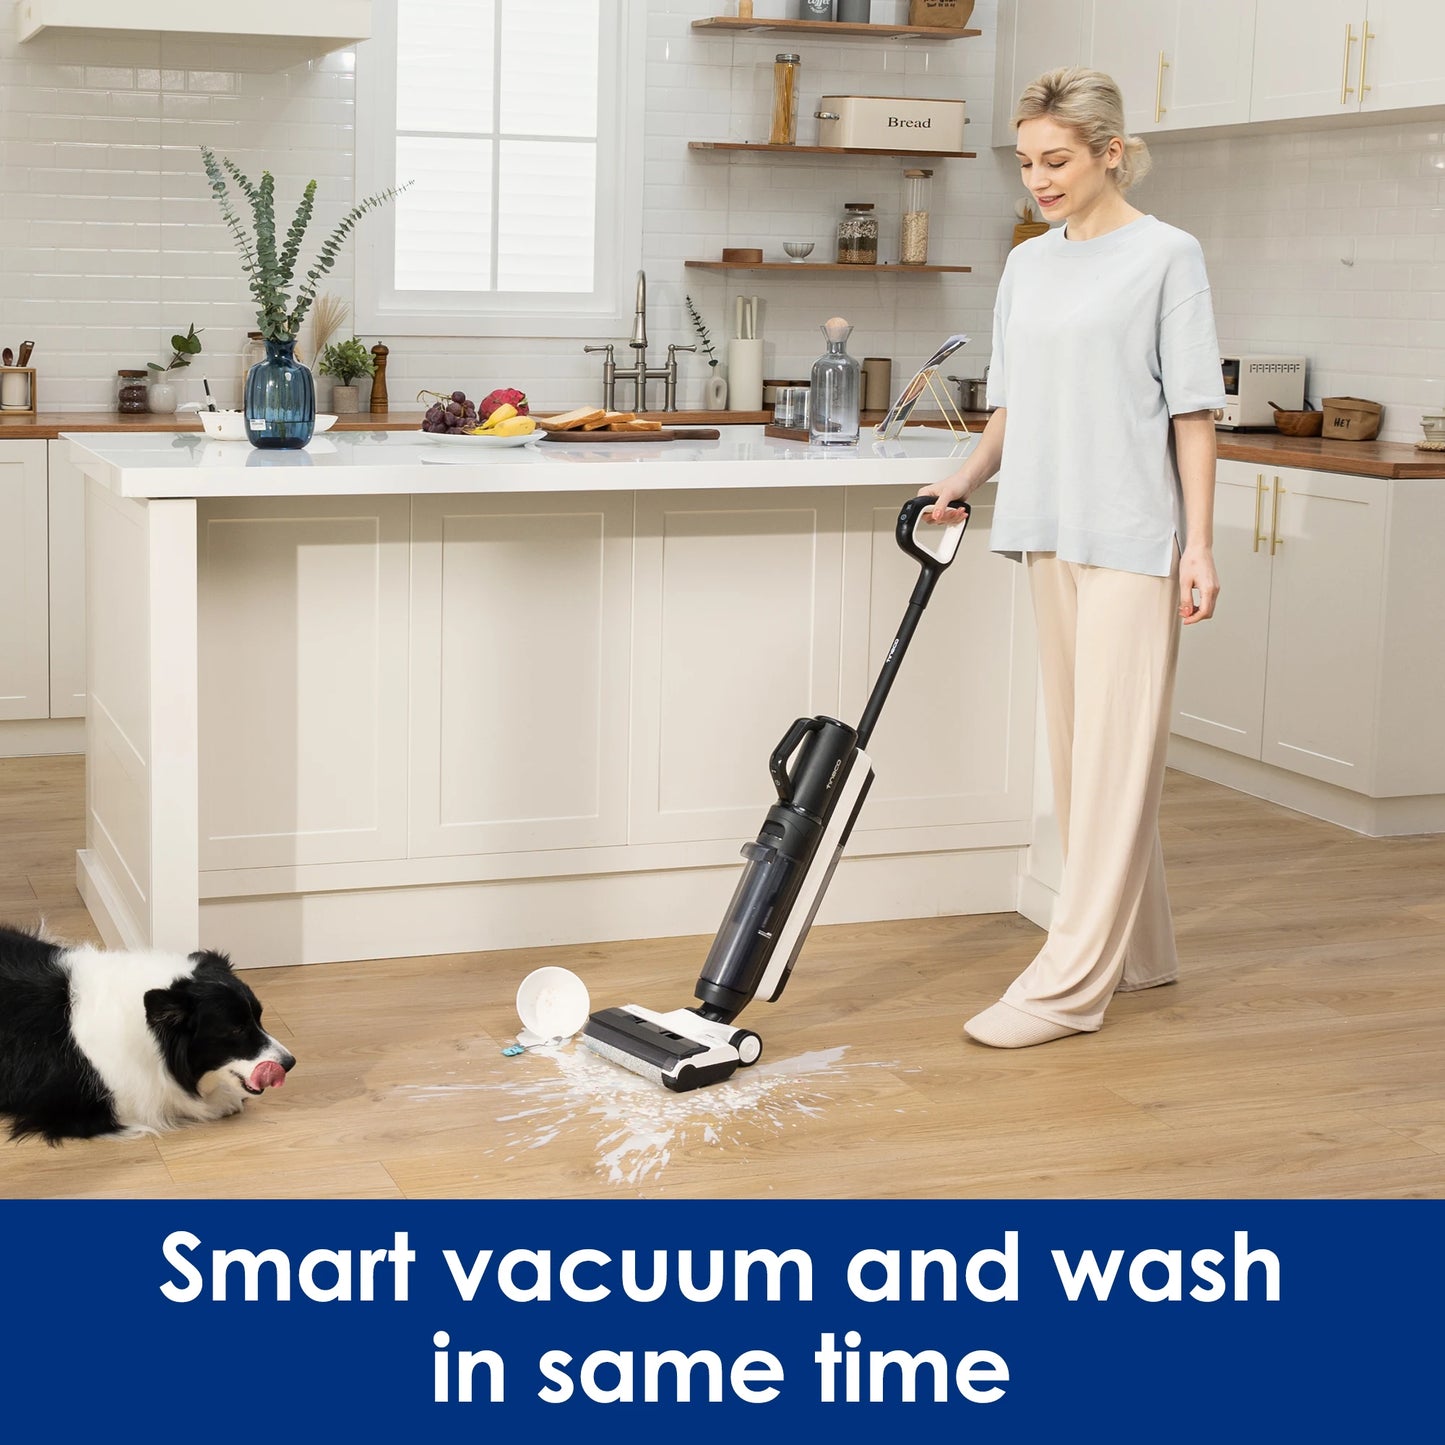 Tineco Floor One S5 Combo Wet Dry Vacuum Cleaner Cordless Smart Floor Washer Upright Home Electric Mop Wireless Self-Cleaning